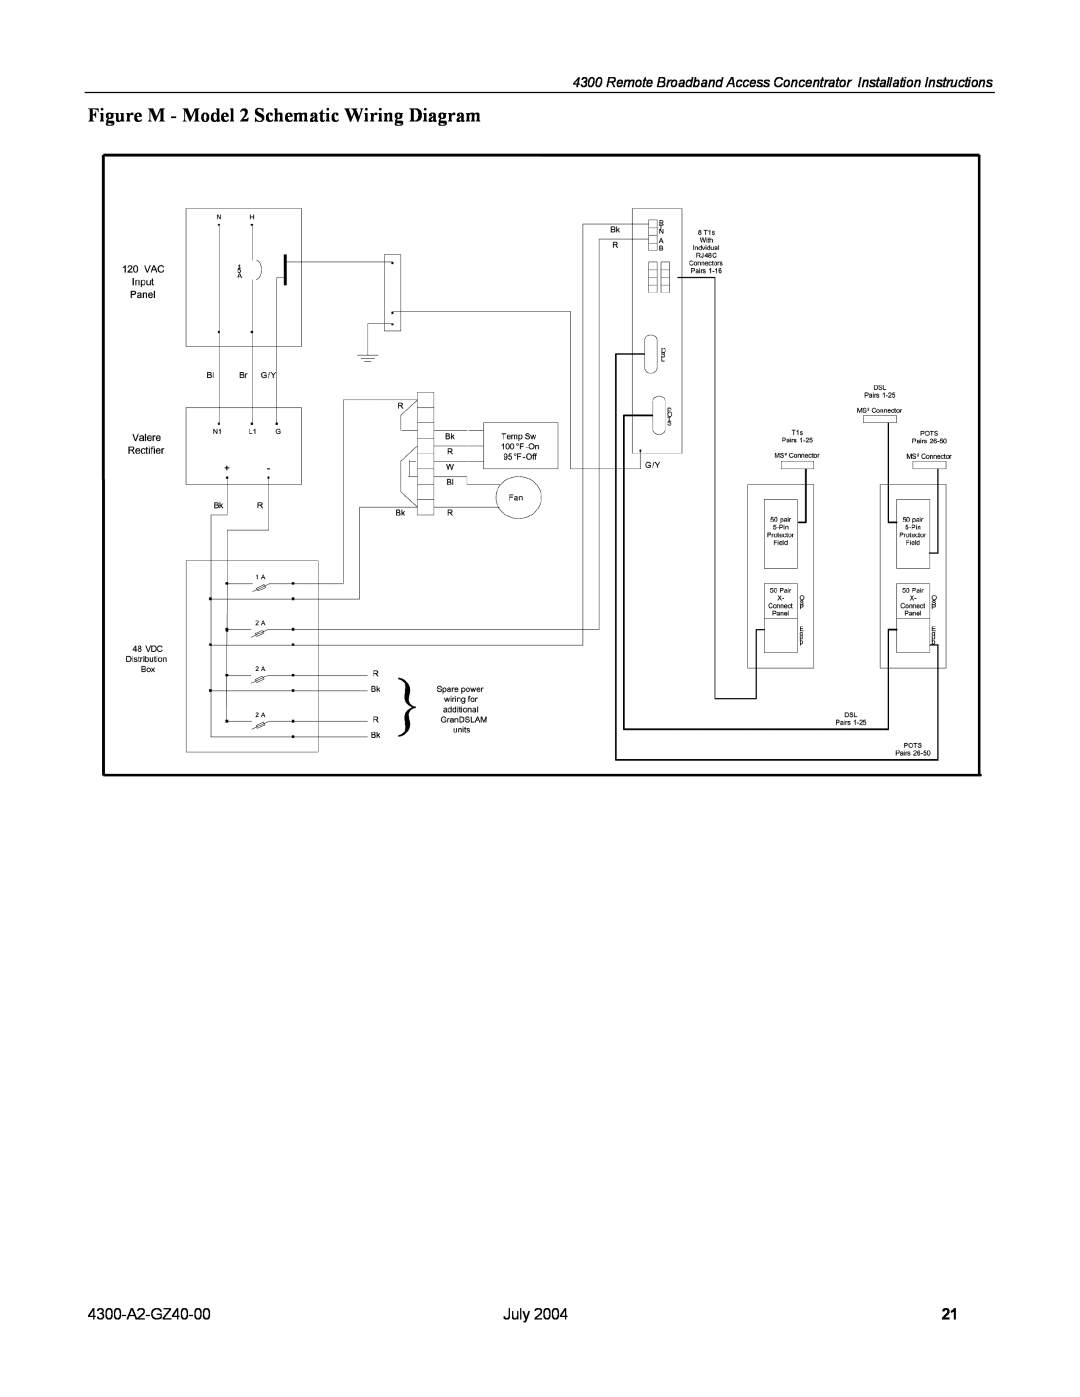 Paradyne installation instructions Figure M - Model 2 Schematic Wiring Diagram, 4300-A2-GZ40-00, July 